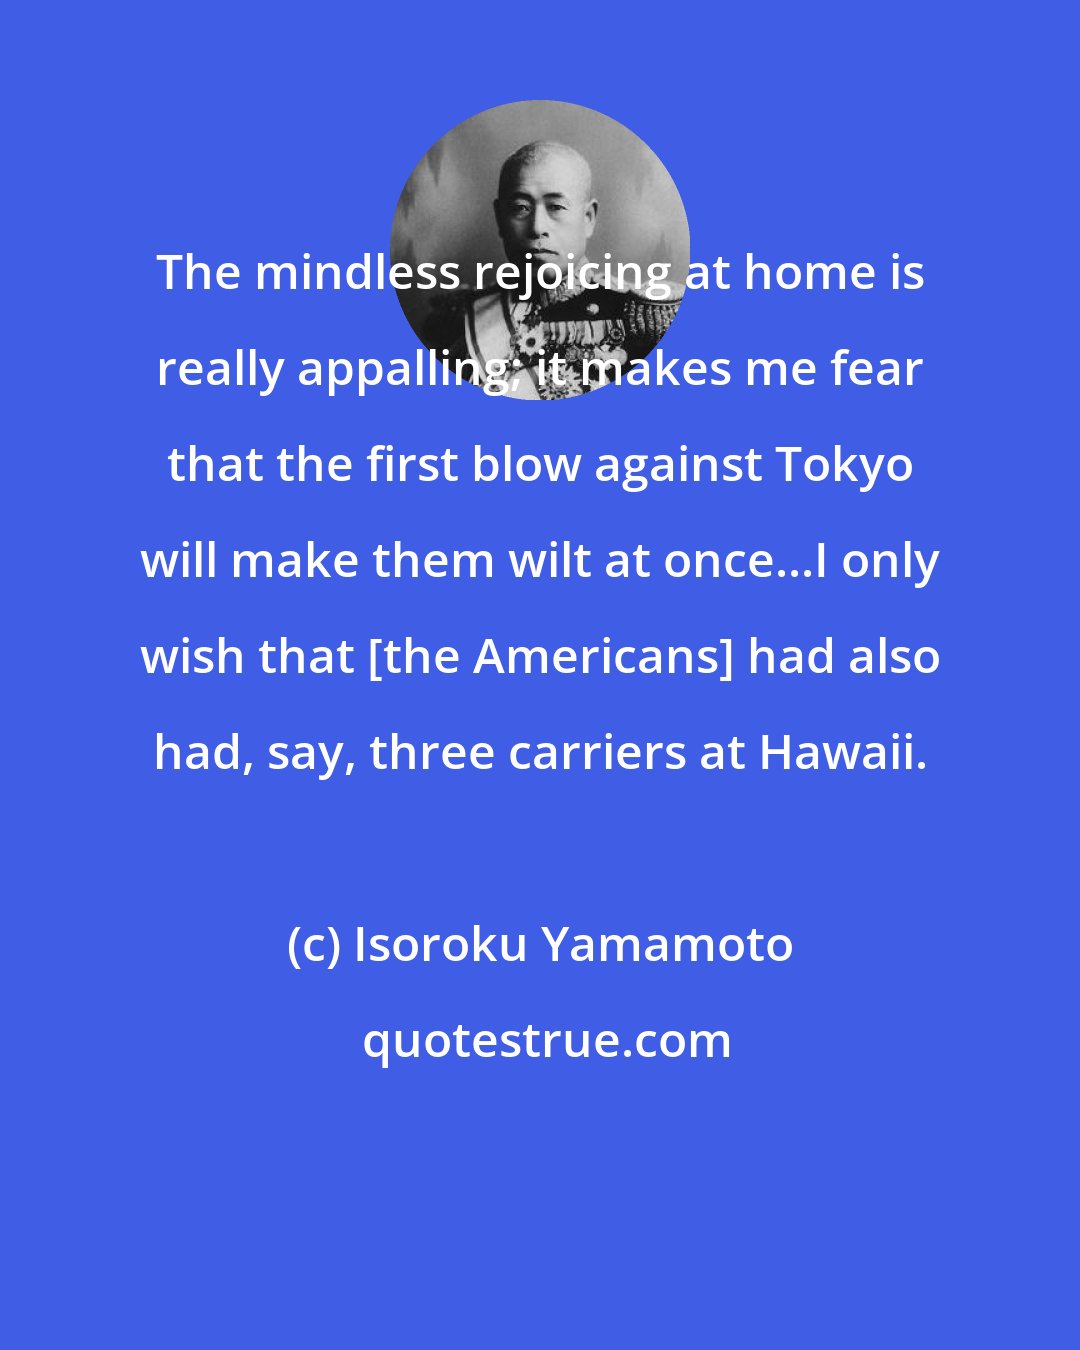 Isoroku Yamamoto: The mindless rejoicing at home is really appalling; it makes me fear that the first blow against Tokyo will make them wilt at once...I only wish that [the Americans] had also had, say, three carriers at Hawaii.